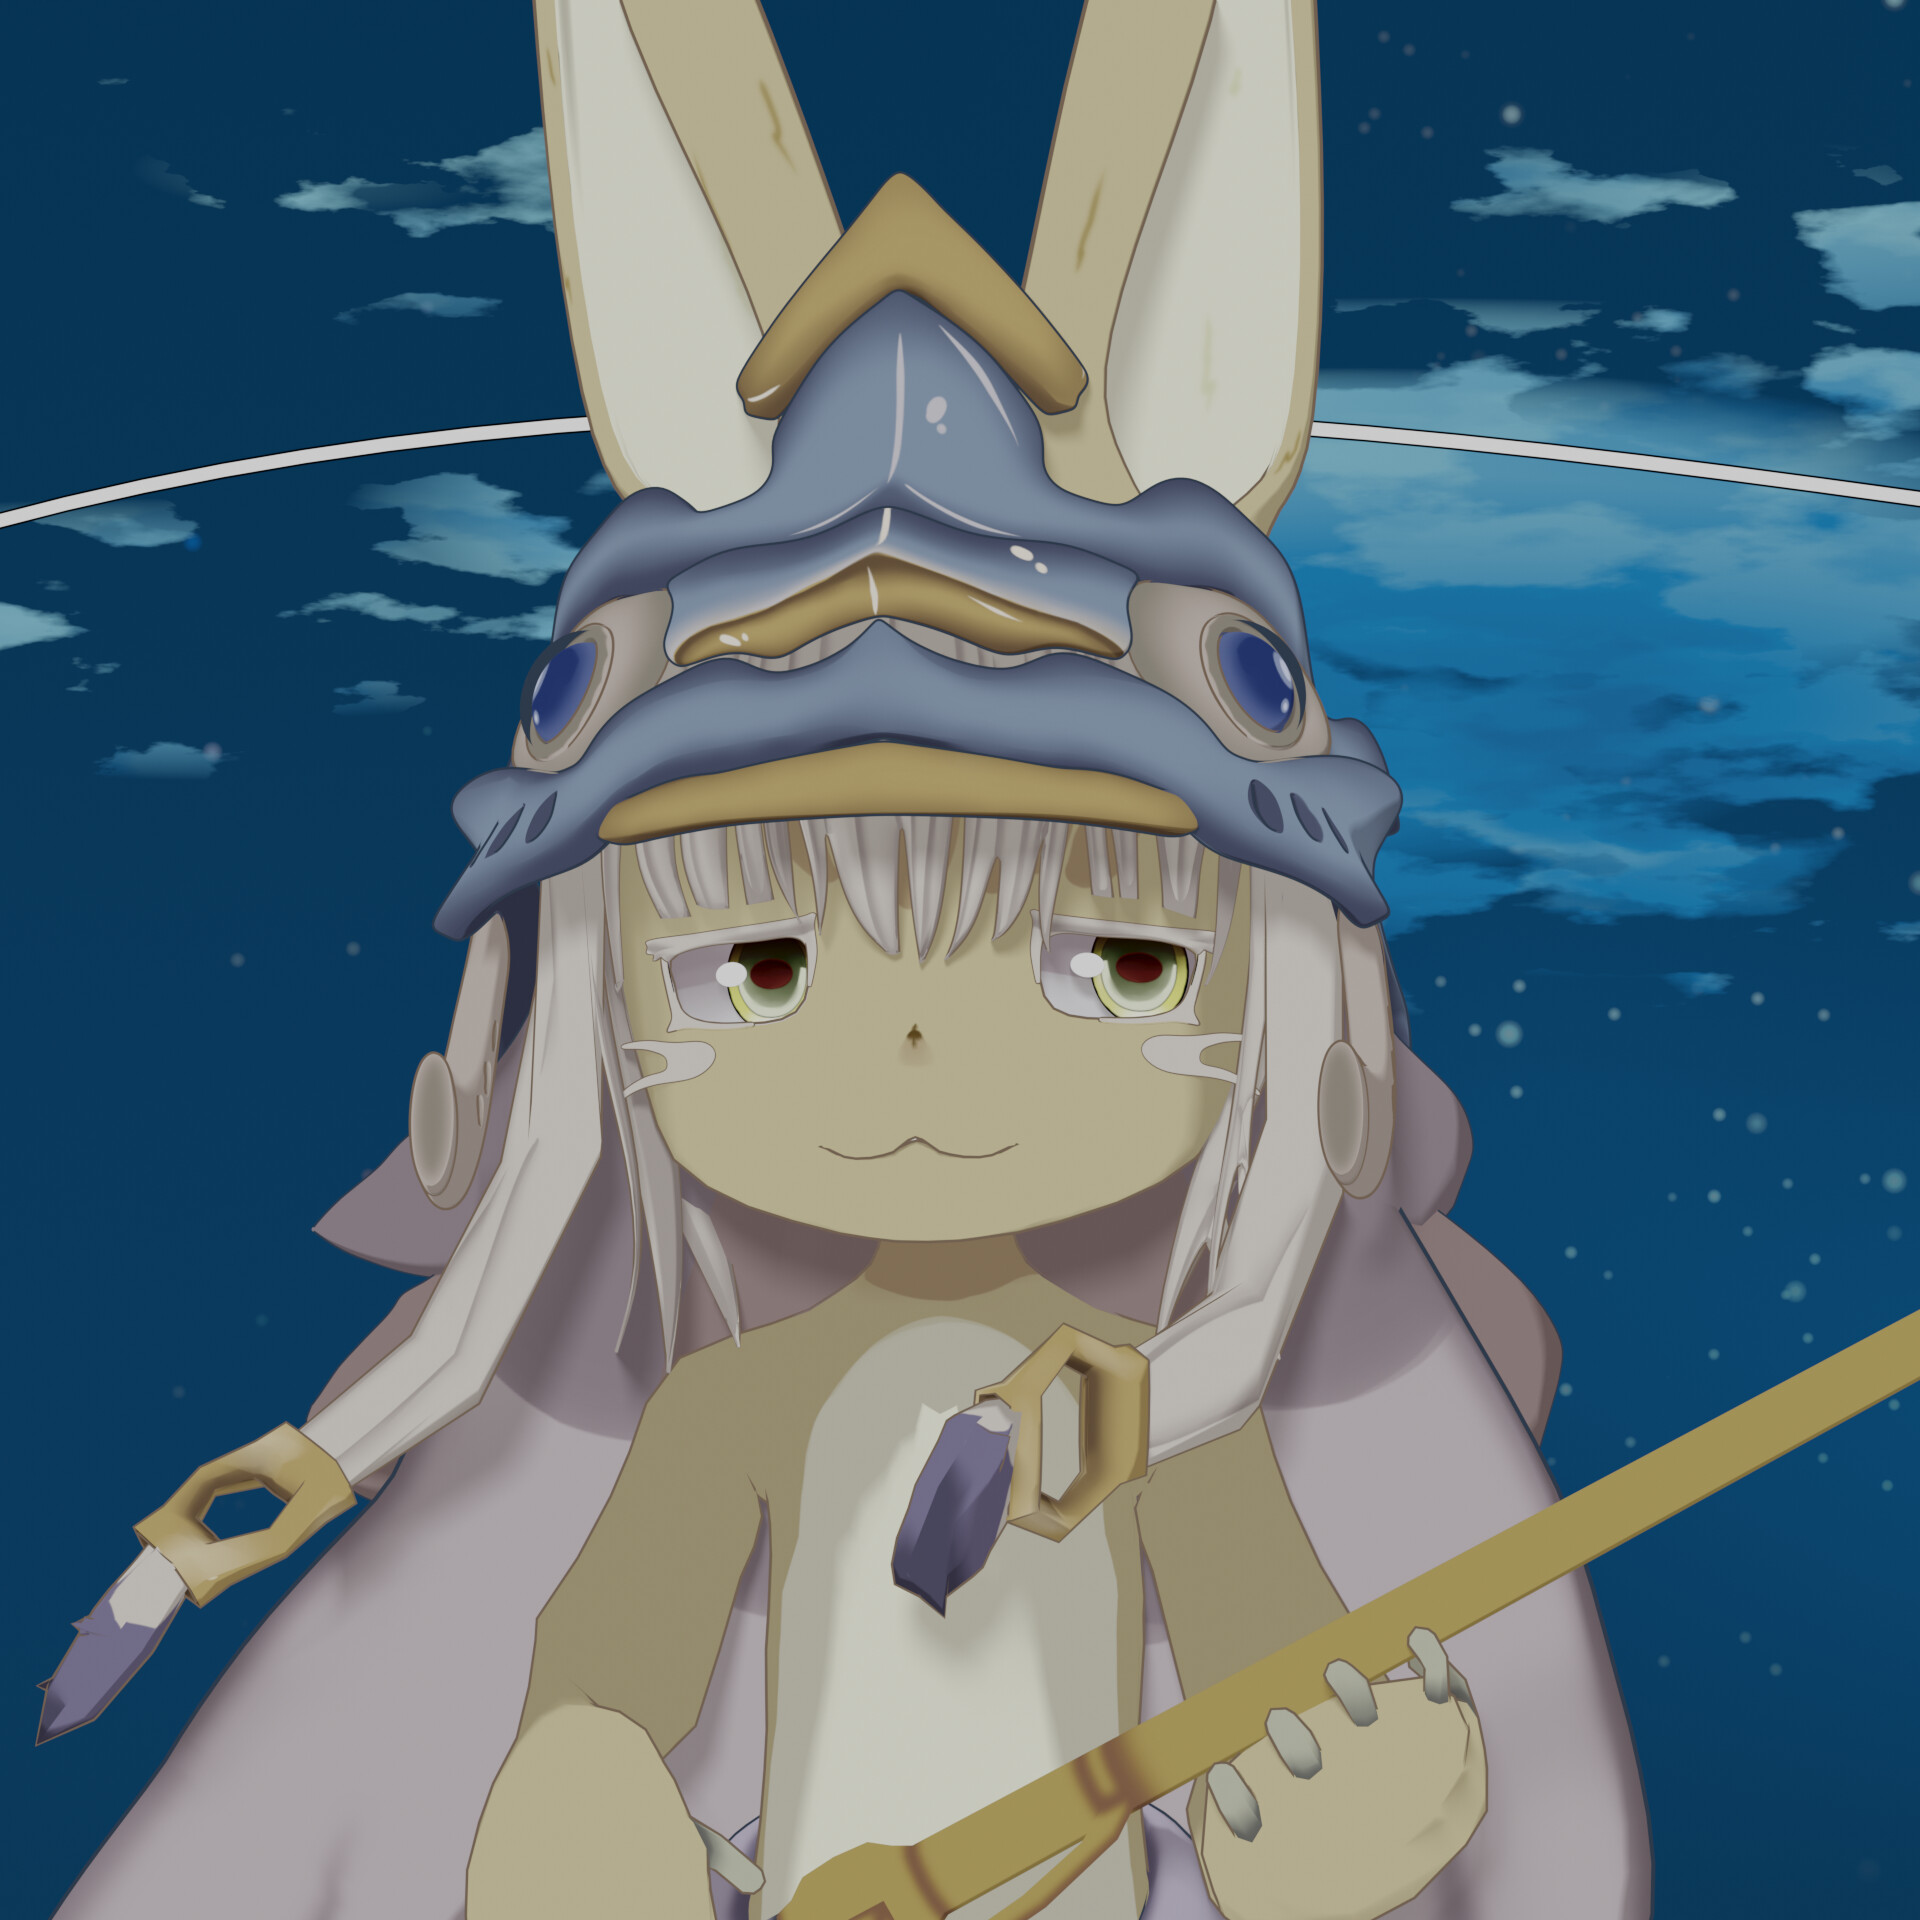 Nanachi (Made in Abyss) - Finished Projects - Blender Artists Community